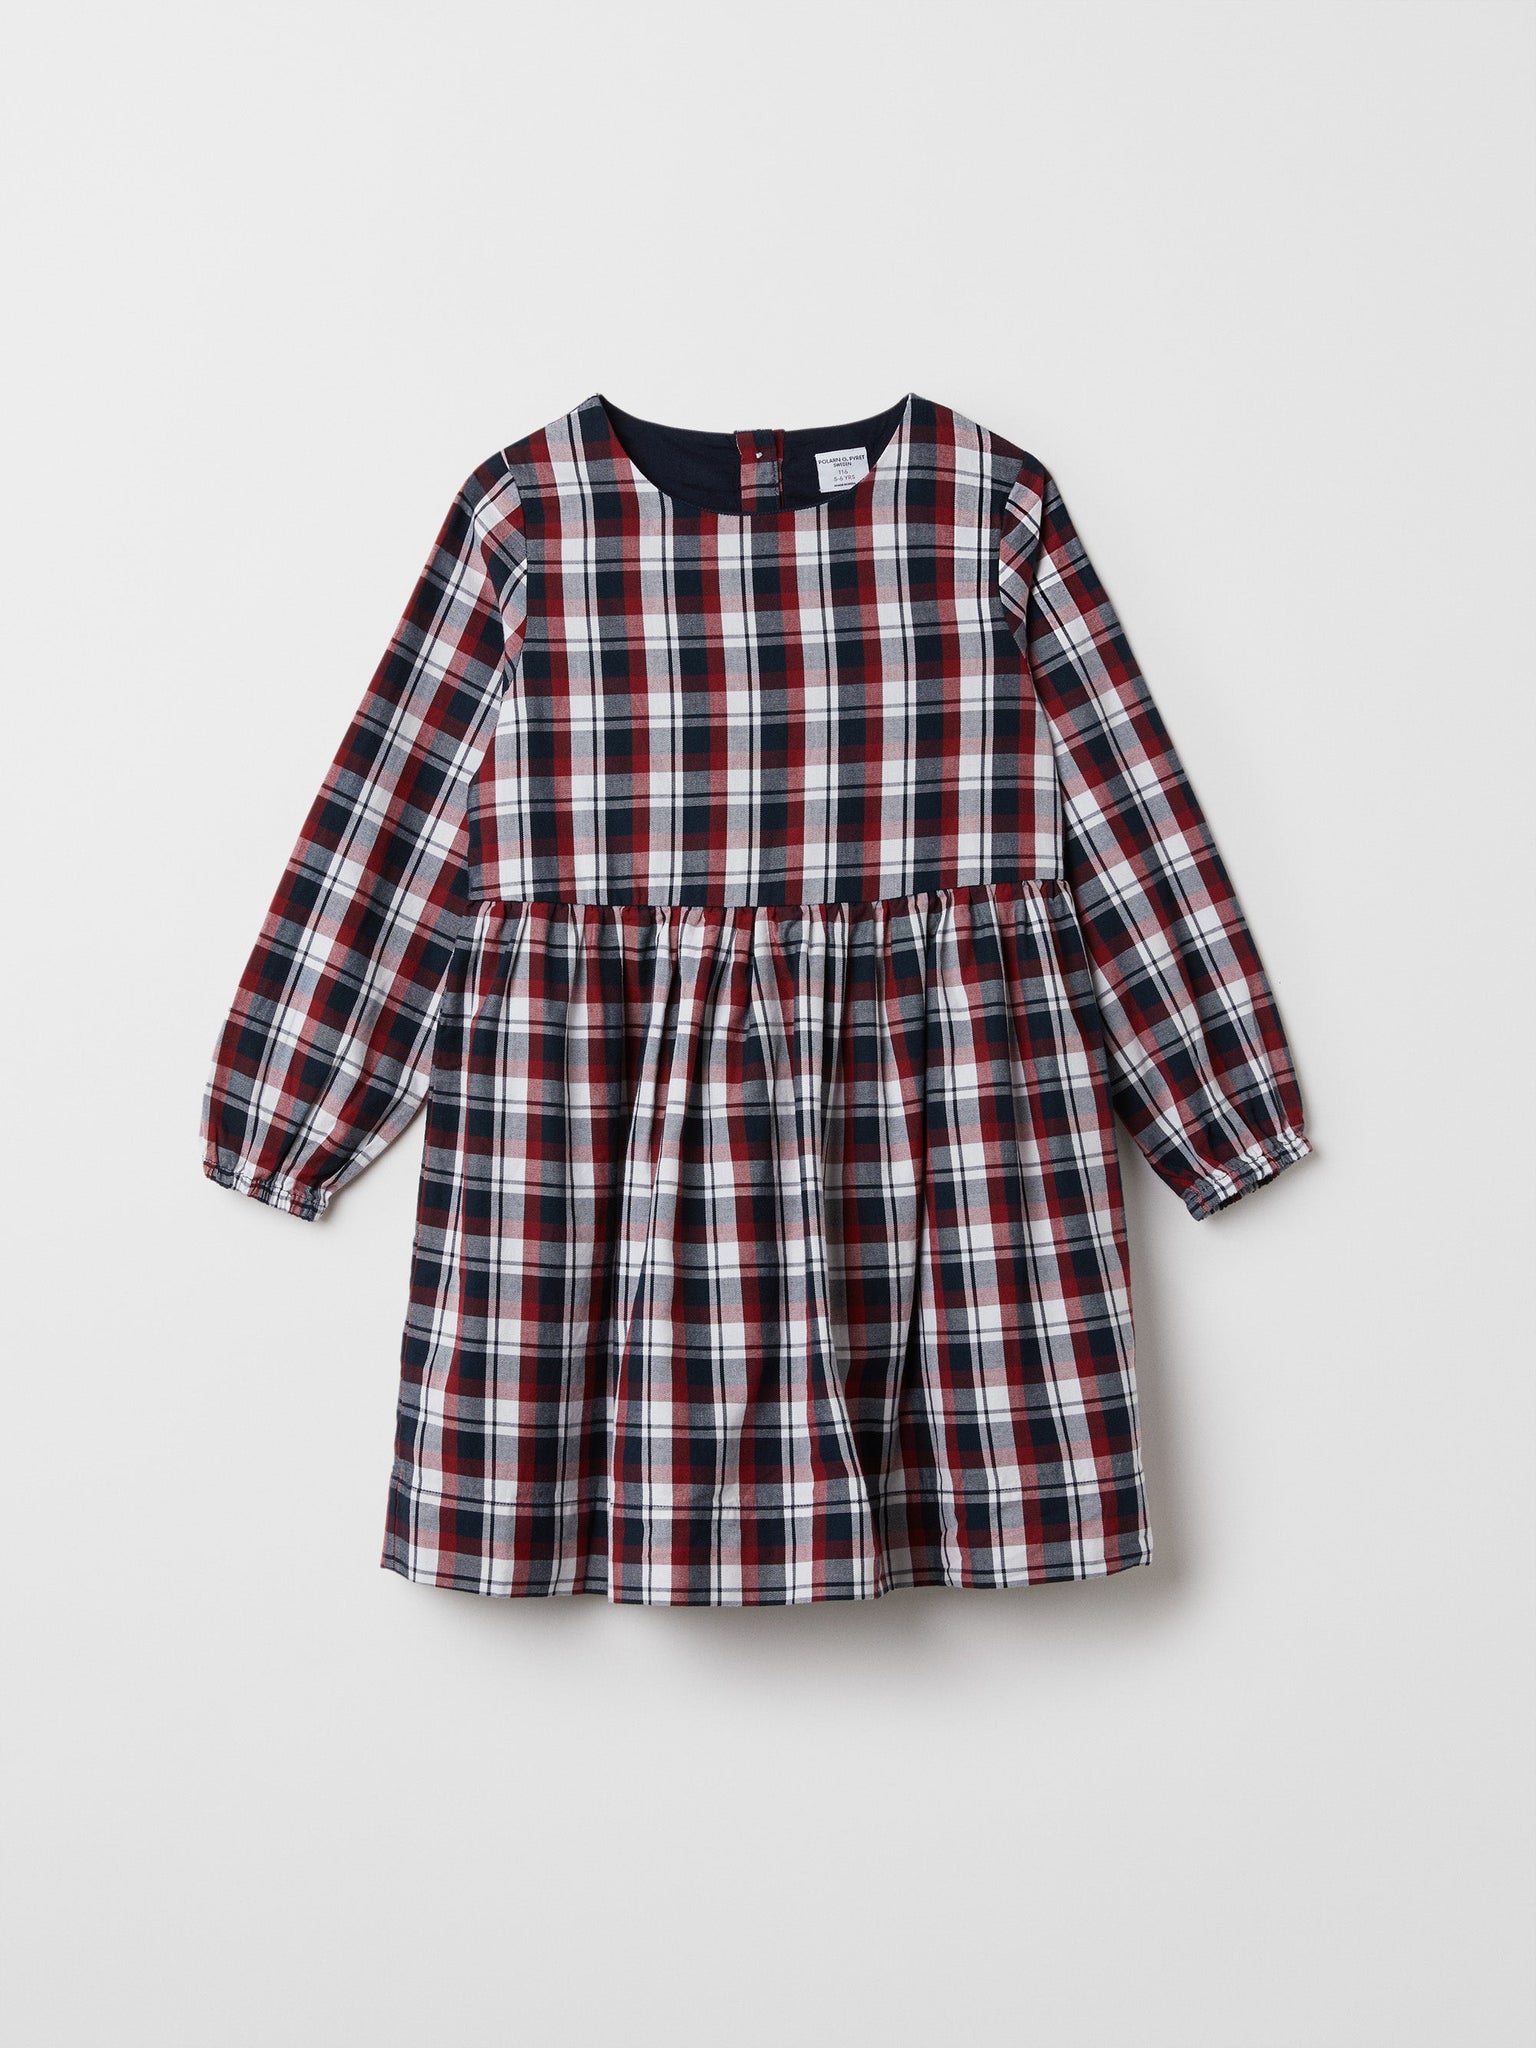 Checked Organic Cotton Kids Dress from the Polarn O. Pyret kidswear collection. Ethically produced kids clothing.